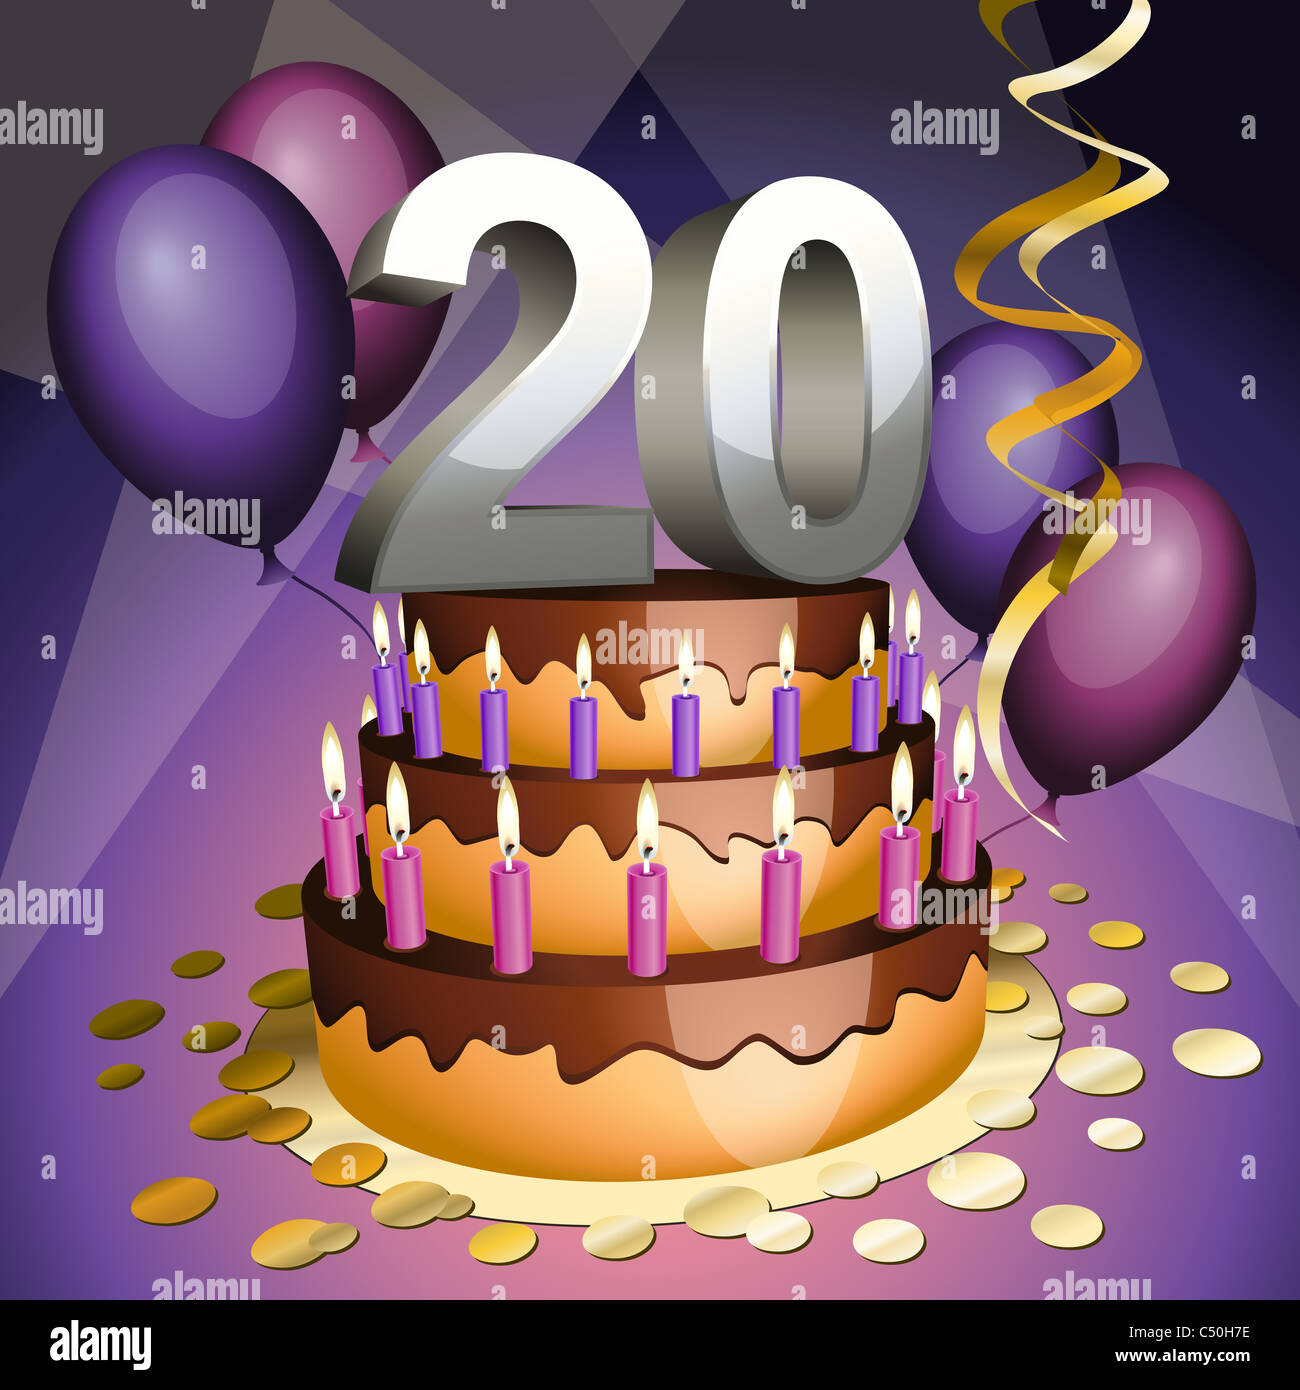 Twentieth anniversary cake with numbers, candles and balloons Stock Photo